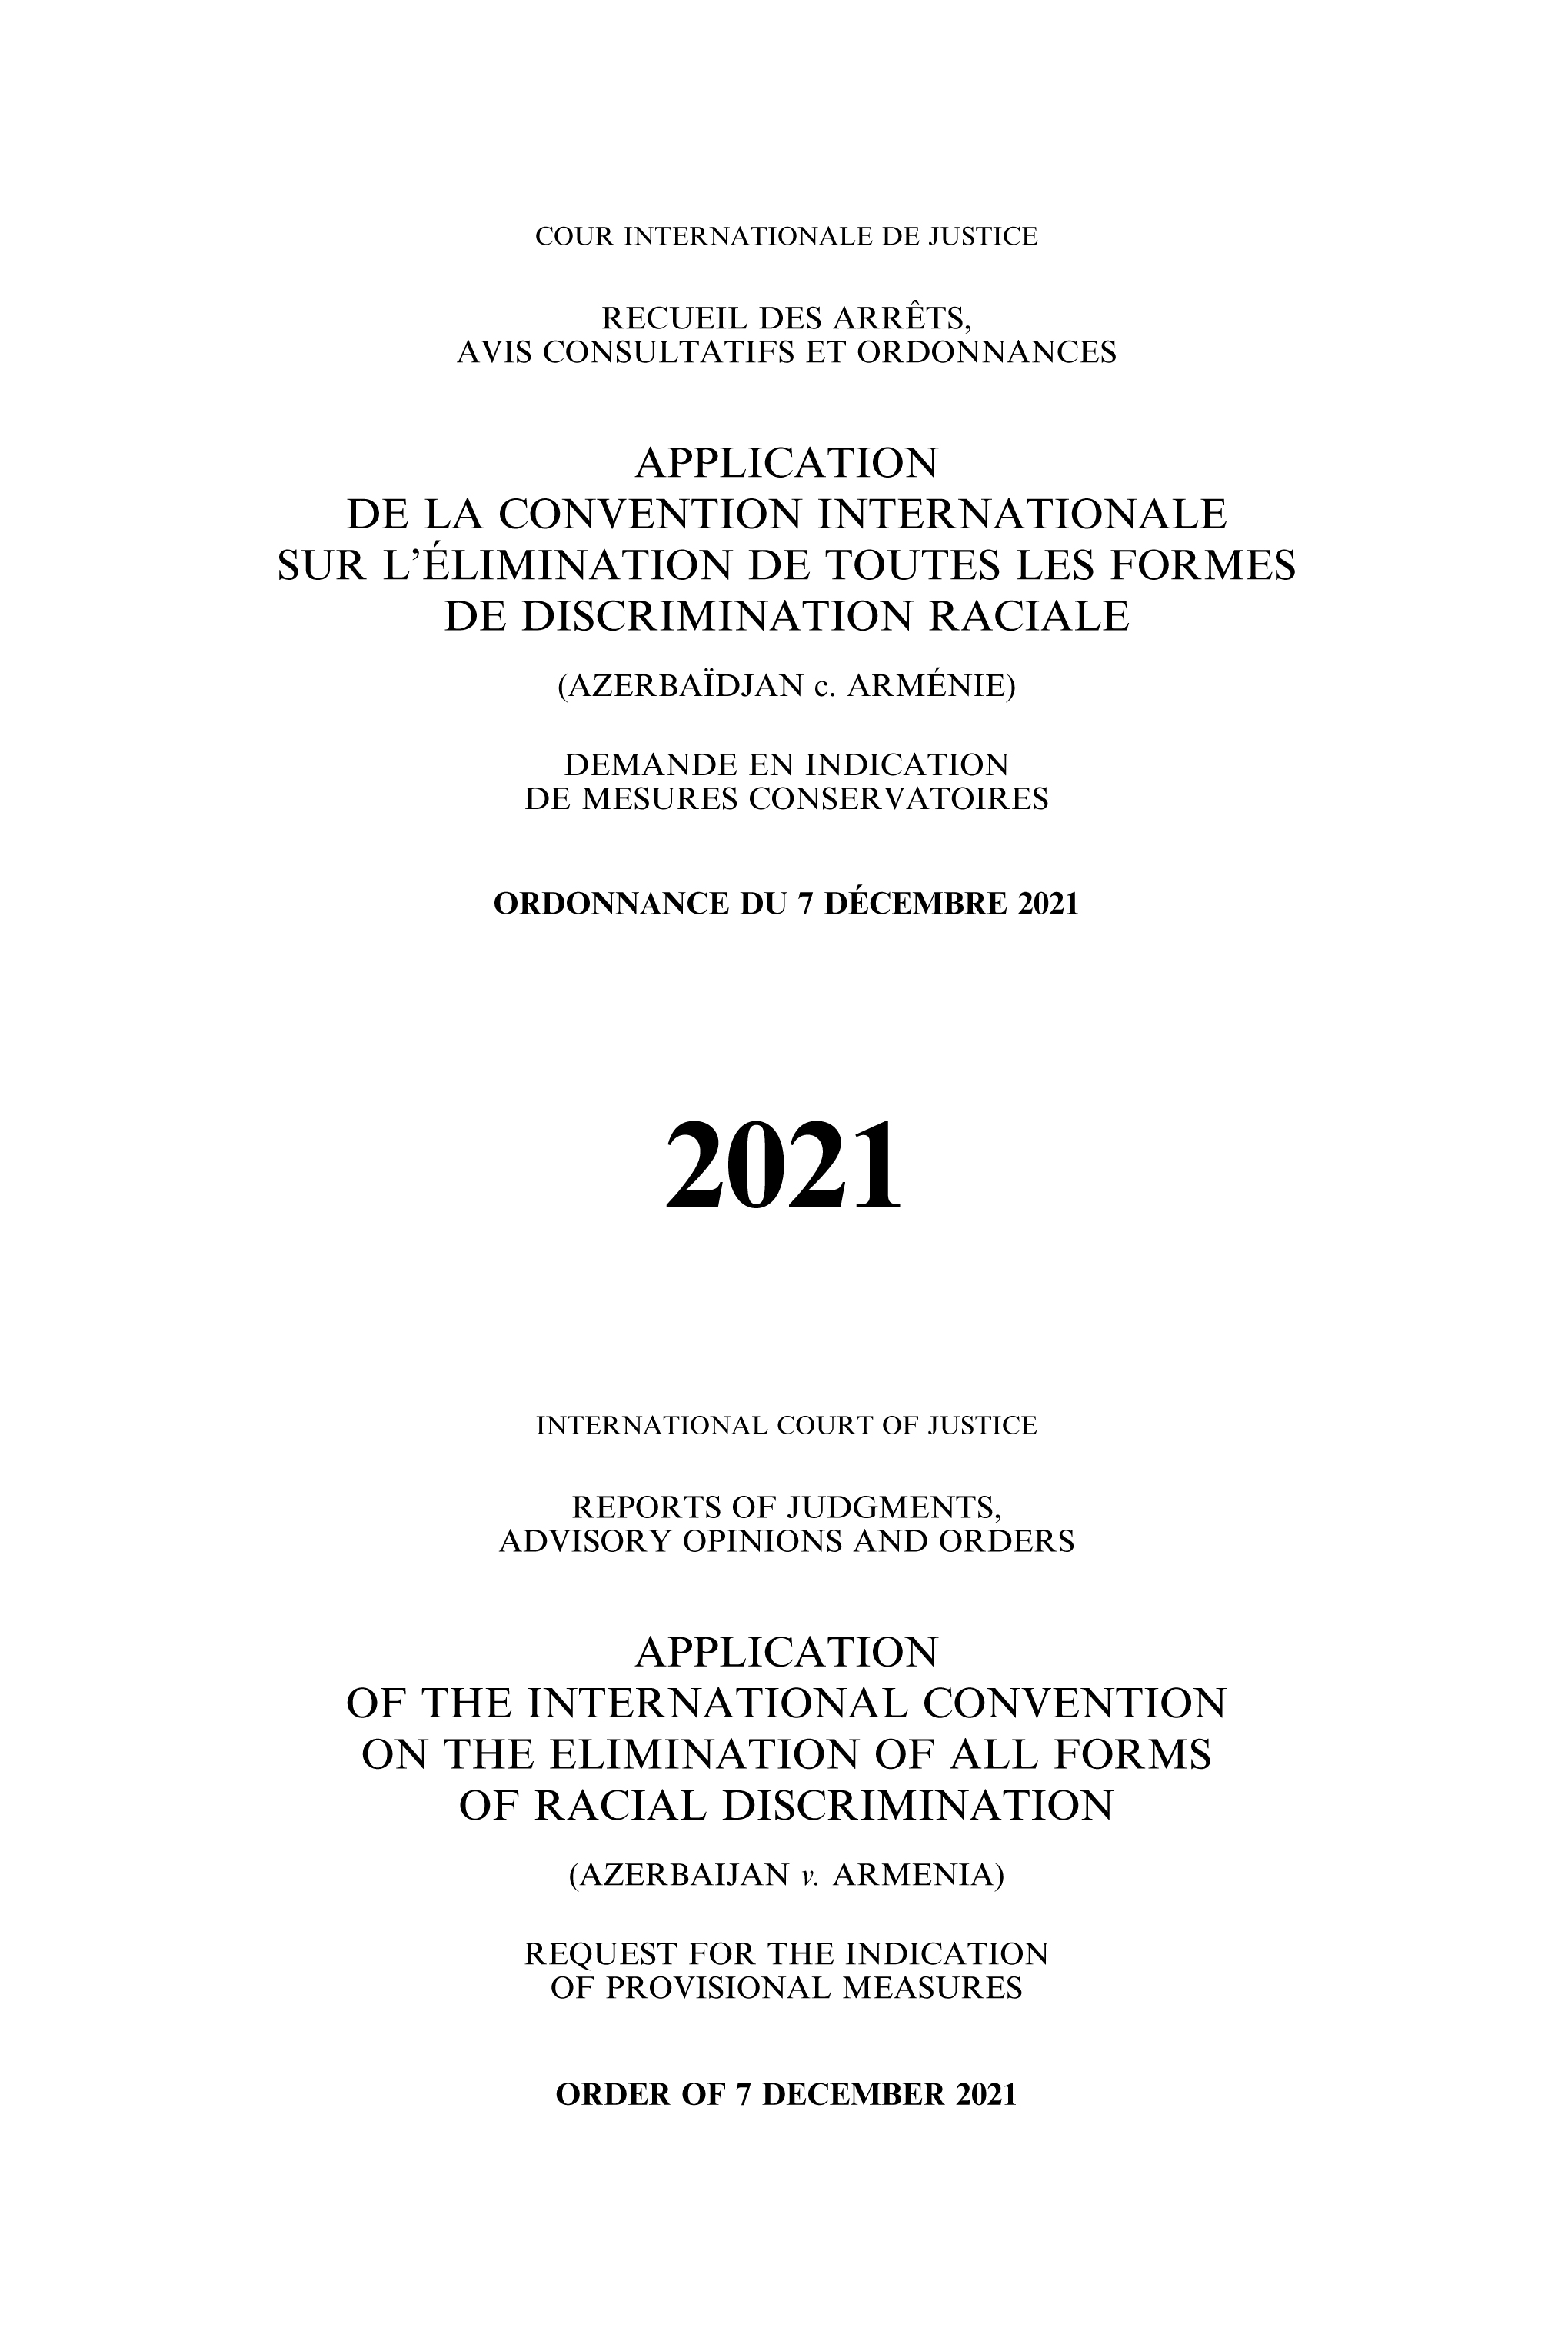 image of Reports of Judgments, Advisory Opinions and Orders: Application of the International Convention on the Elimination of All Forms of Racial Discrimination (Azerbaijan v. Armenia) Request for the Indication of Provisional Measures